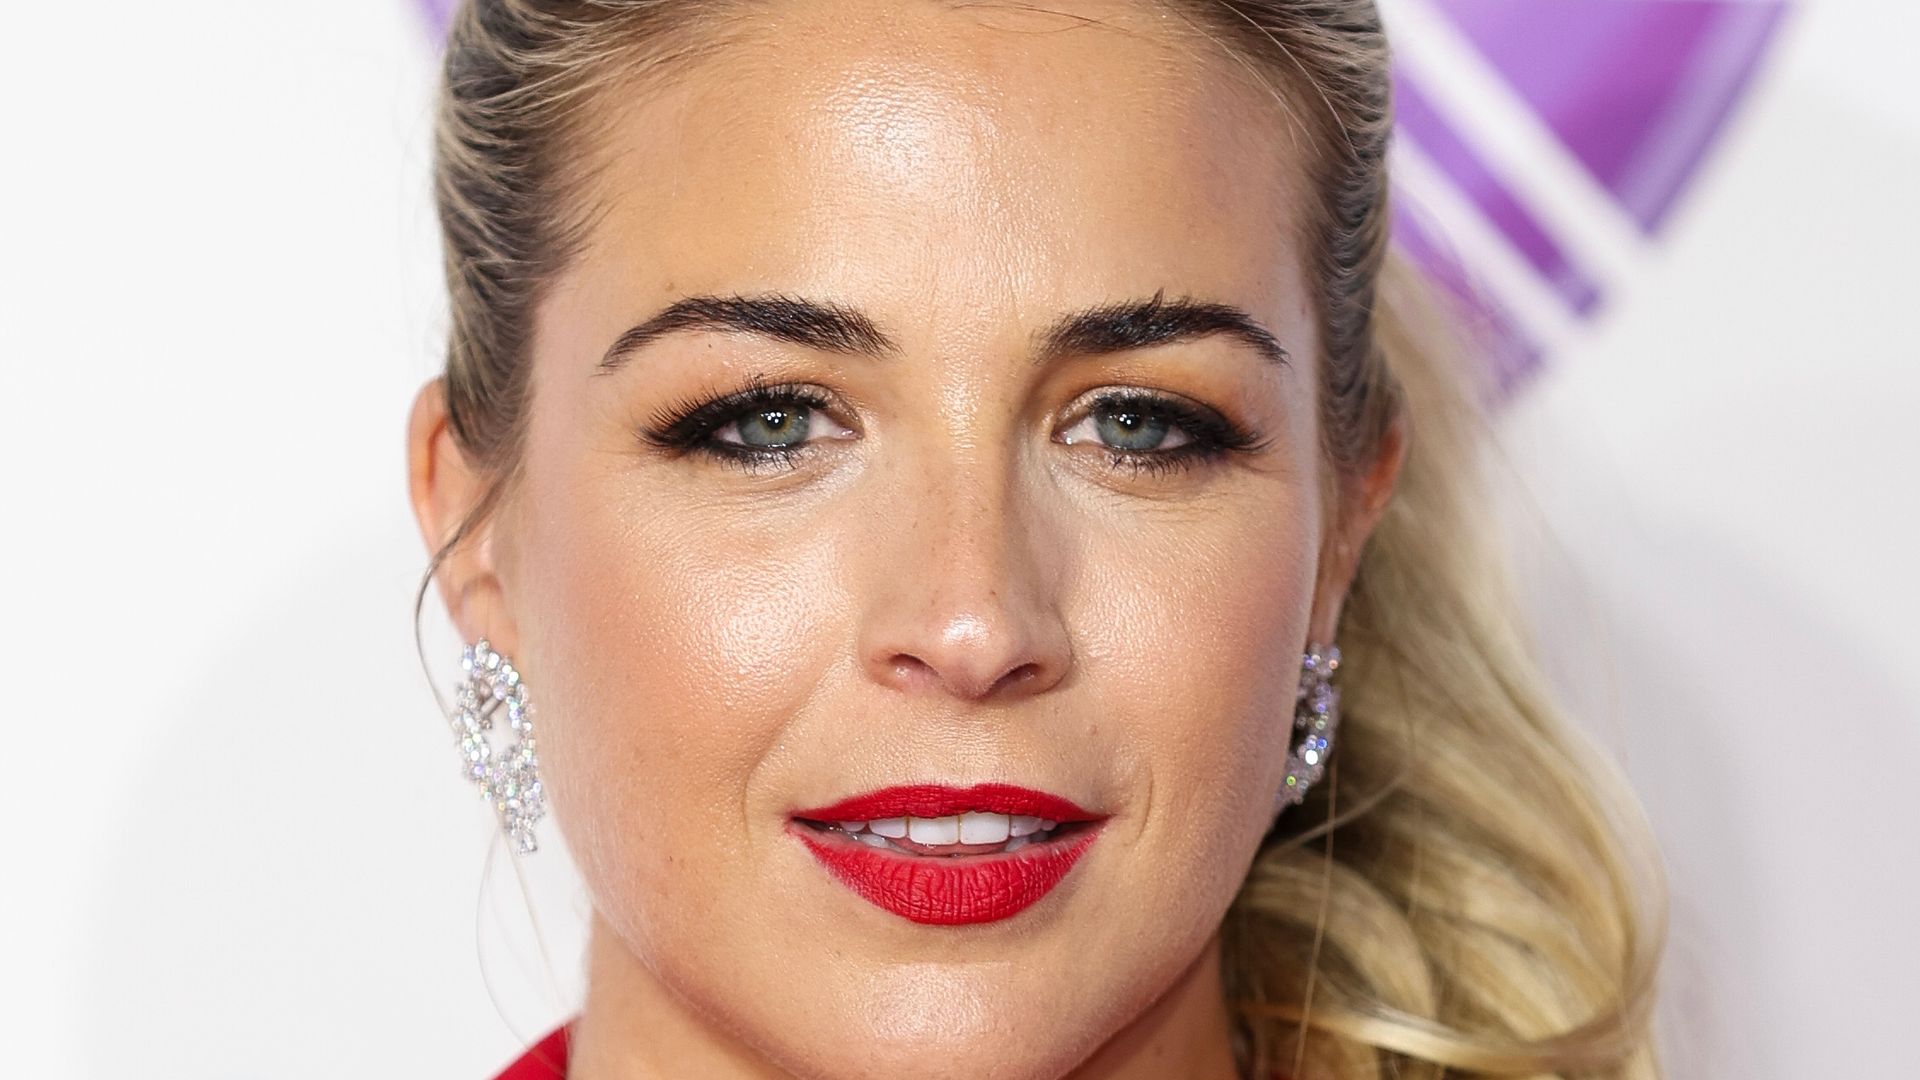 Gemma Atkinson wearing a red suit and red lip with hair up